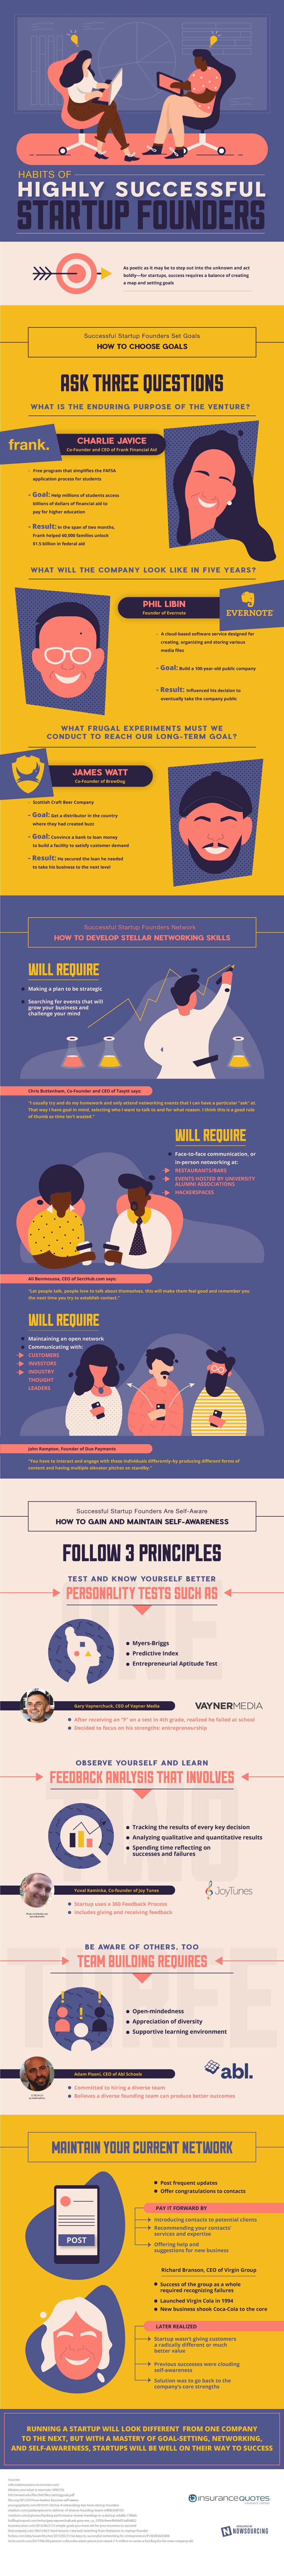 What are the Habits of Highly Successful Startup Founders? - infographic